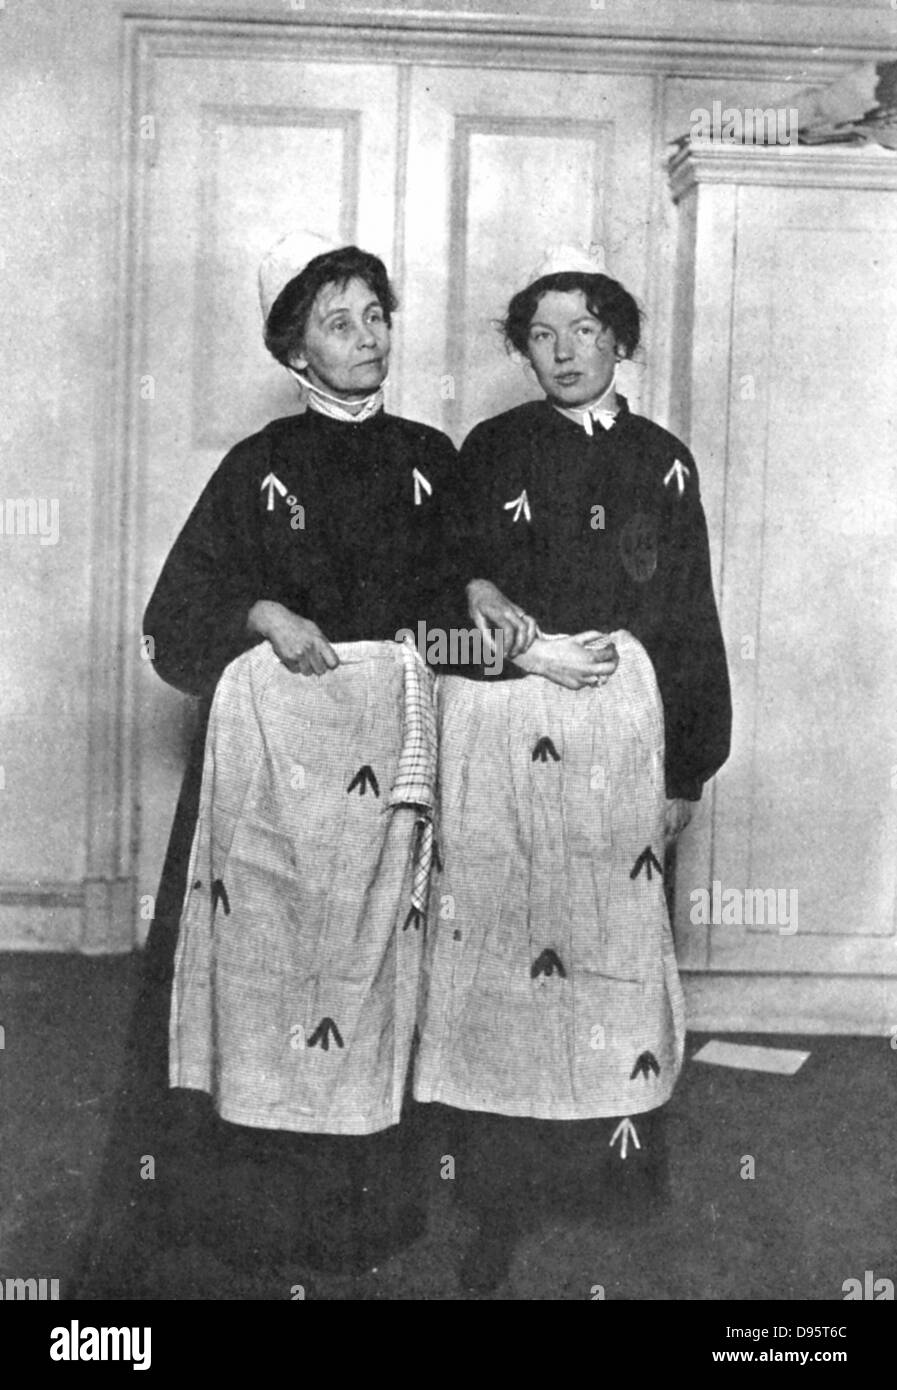 Emmeline Pankhurst (1857-1918)  and her daughter Christabel (1880-1958), English suffragettes in prison dress Stock Photo